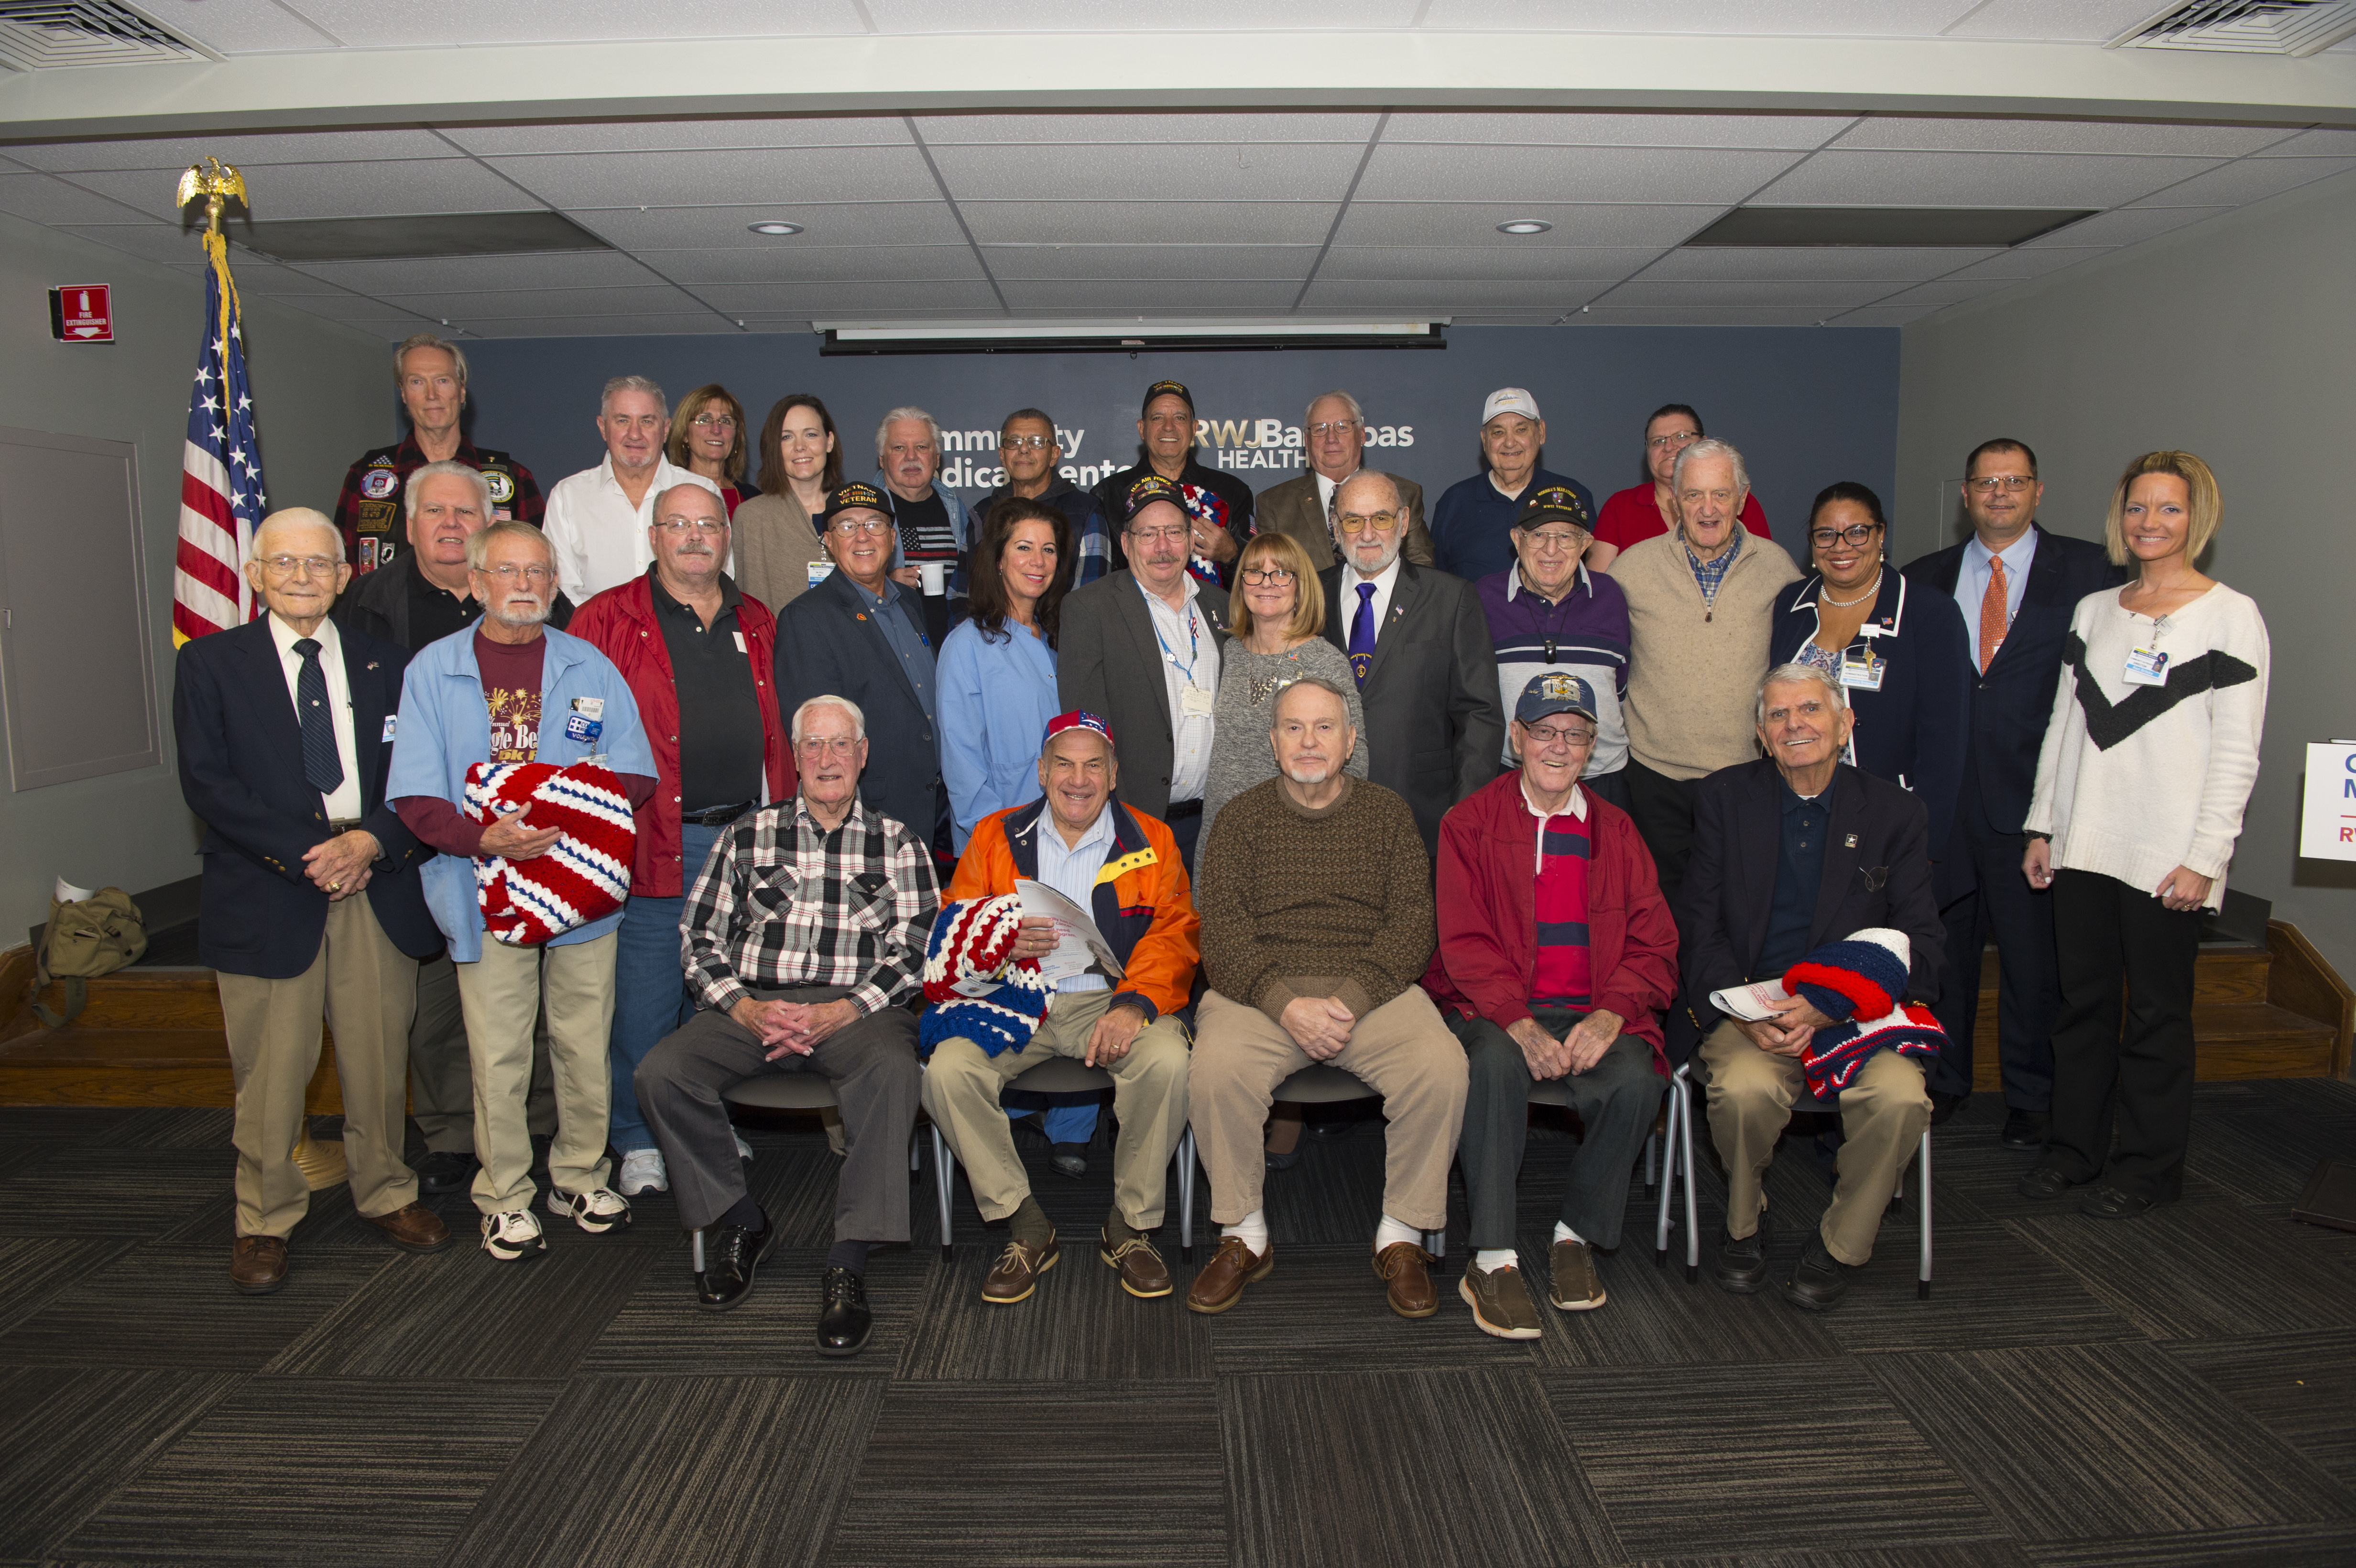 Michael Mimoso, MHSA, FACHE, President & CEO, Community Medical Center (second row, second on right) joined over 30 veterans to thank them for their service to our country at a luncheon held in their honor. 